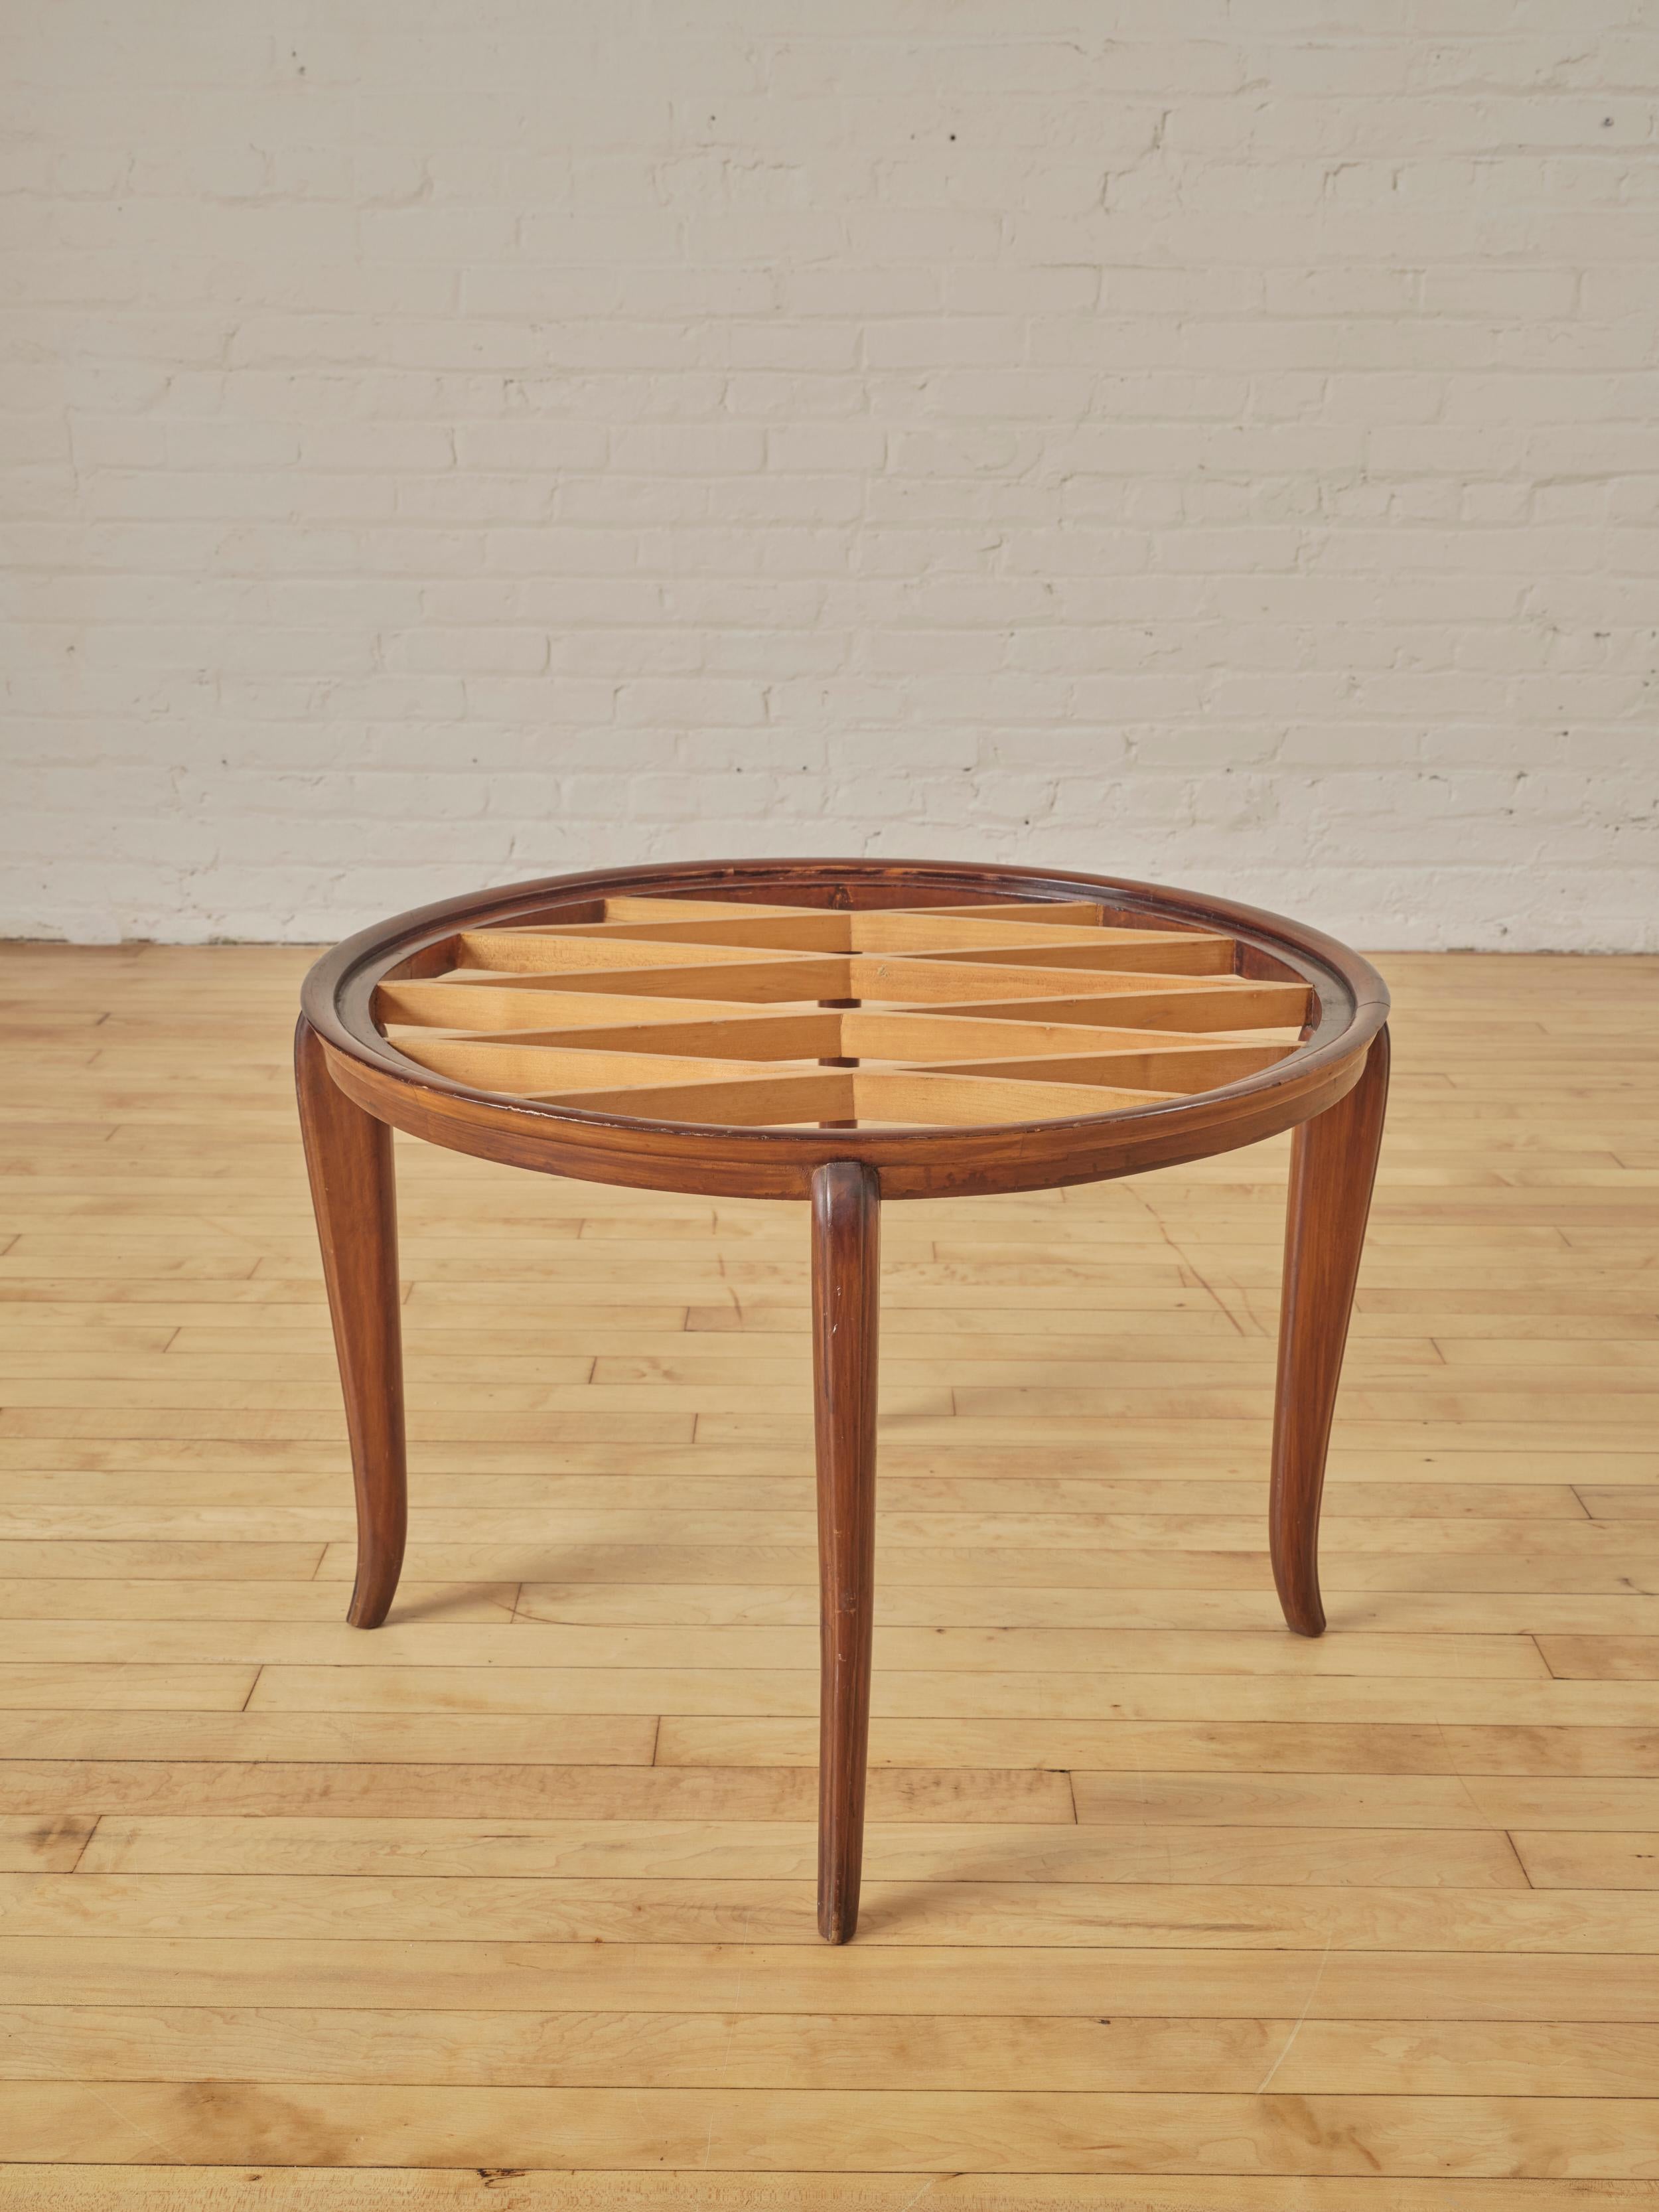 Grid Pattern Coffee Table by Paolo Buffa In Good Condition For Sale In Long Island City, NY